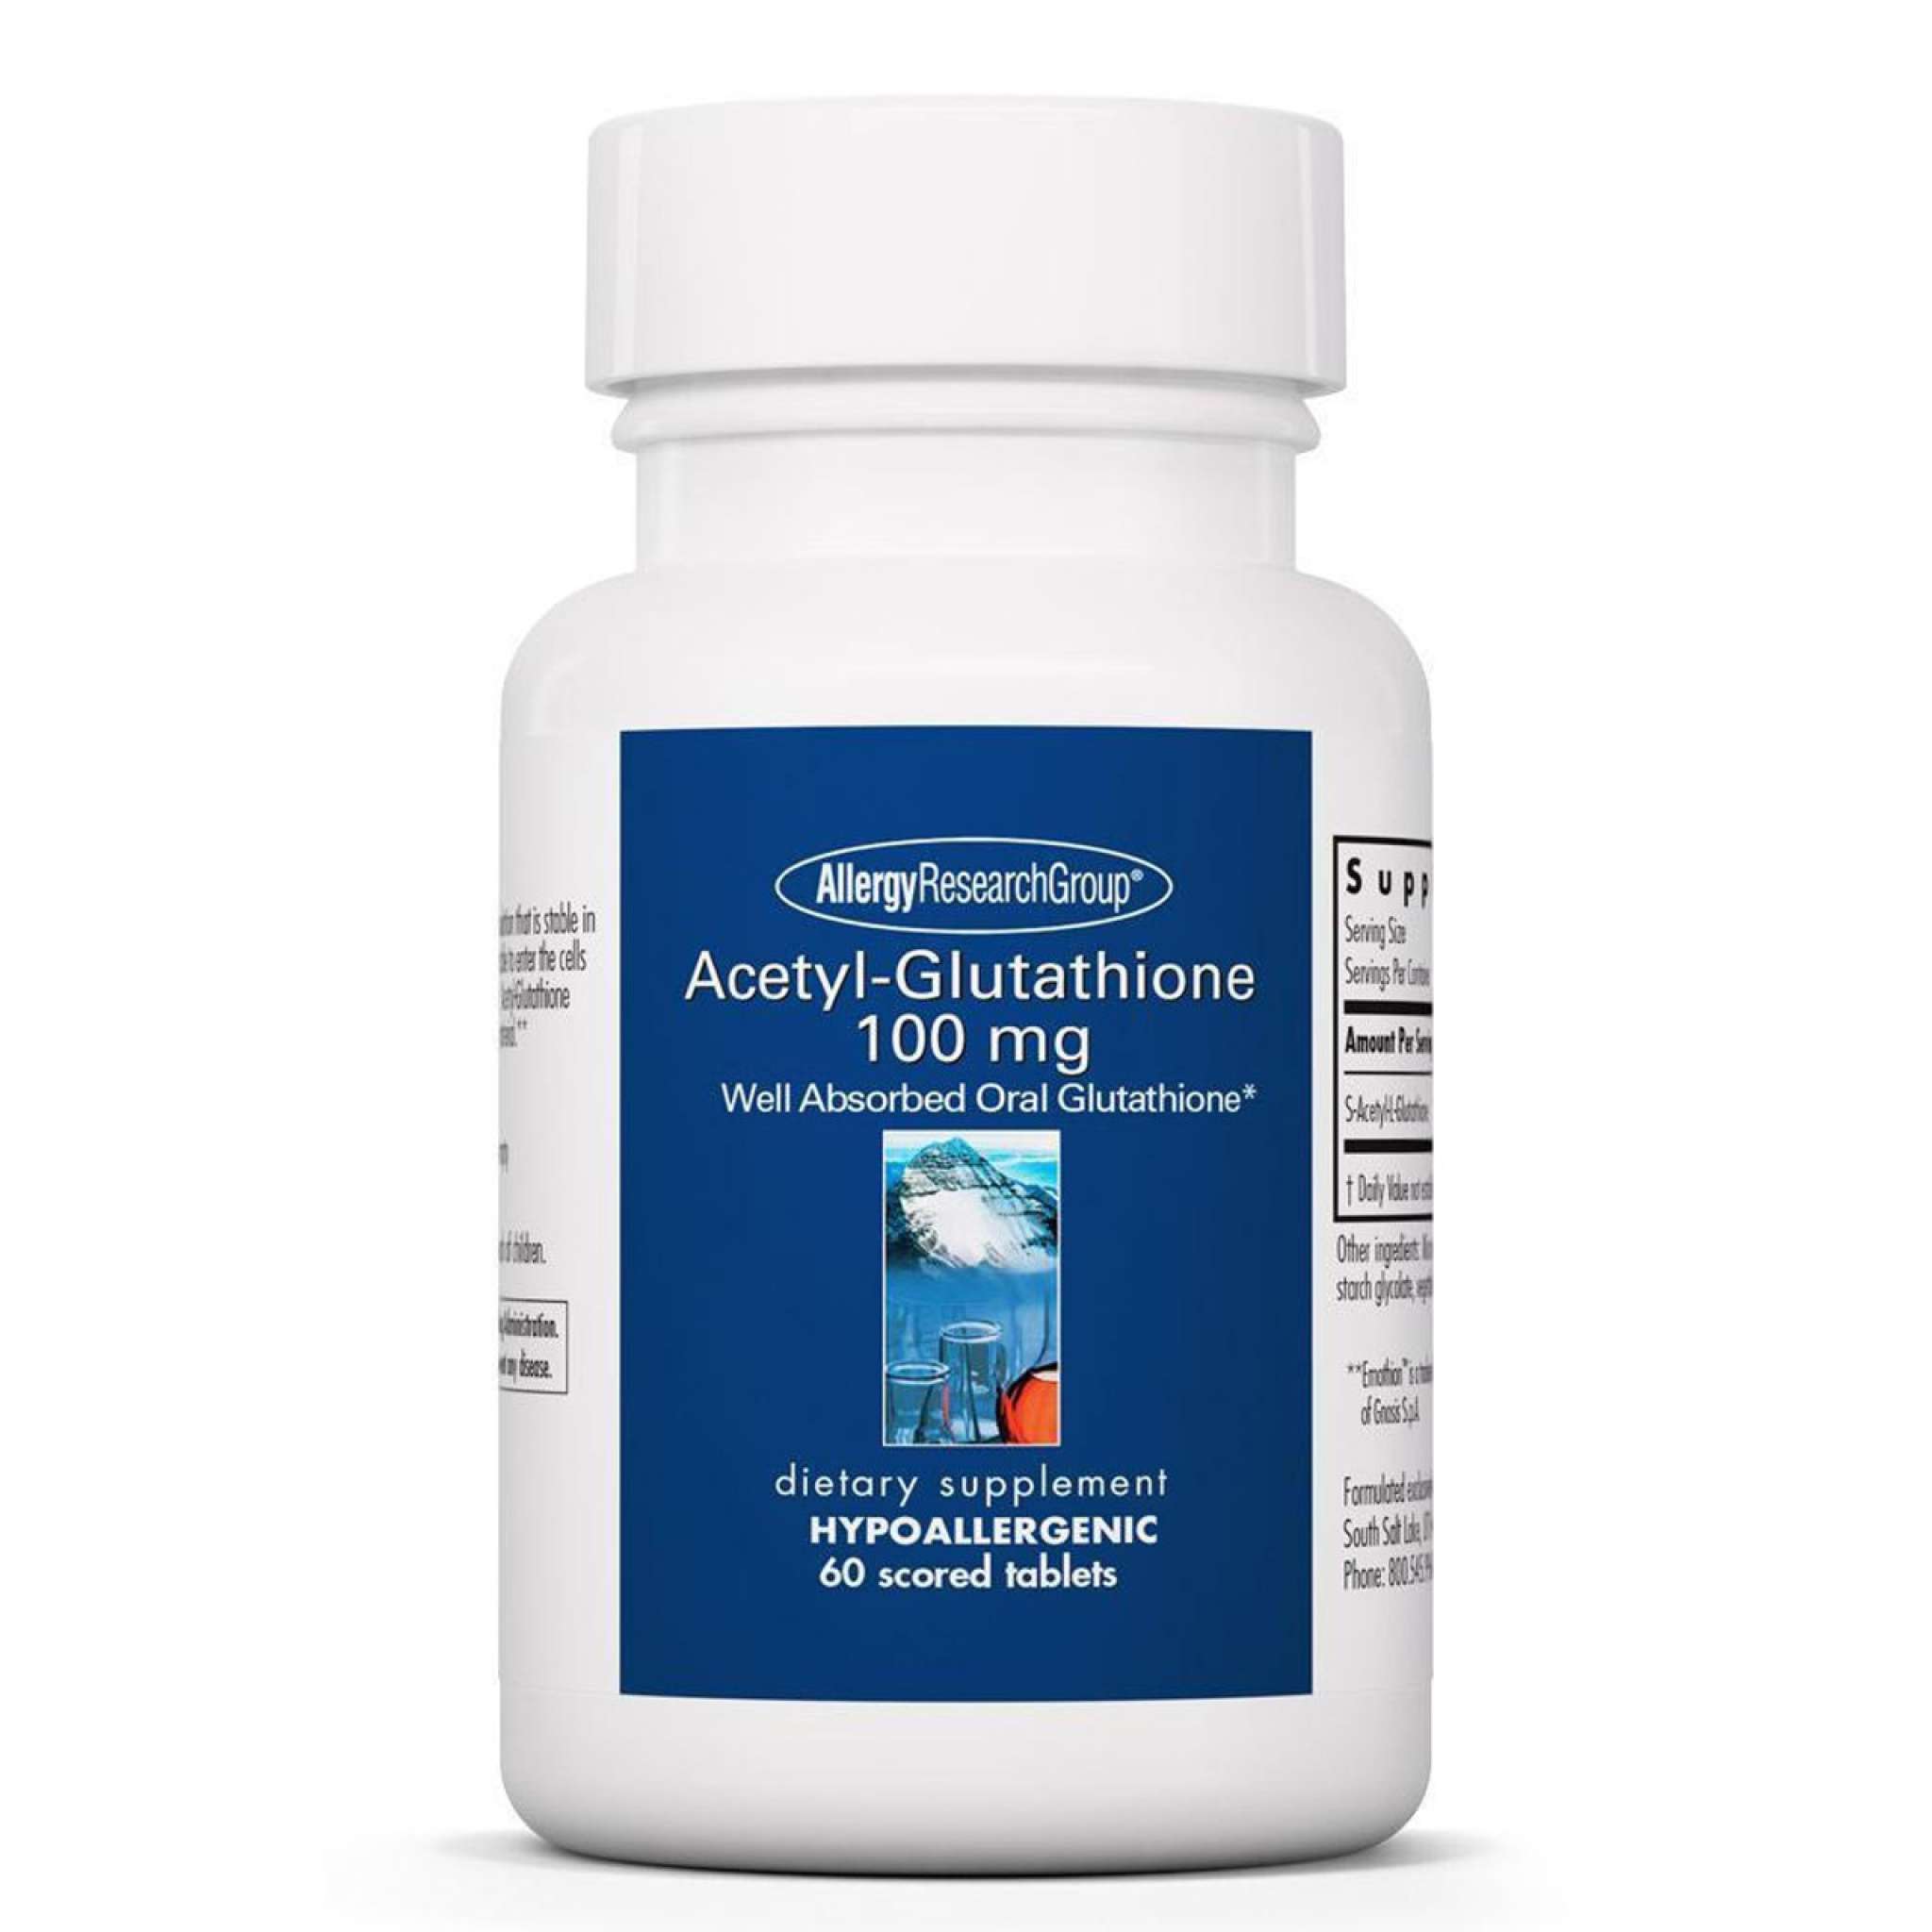 Allergy Research Group - Acetyl Glutathione 100 mg